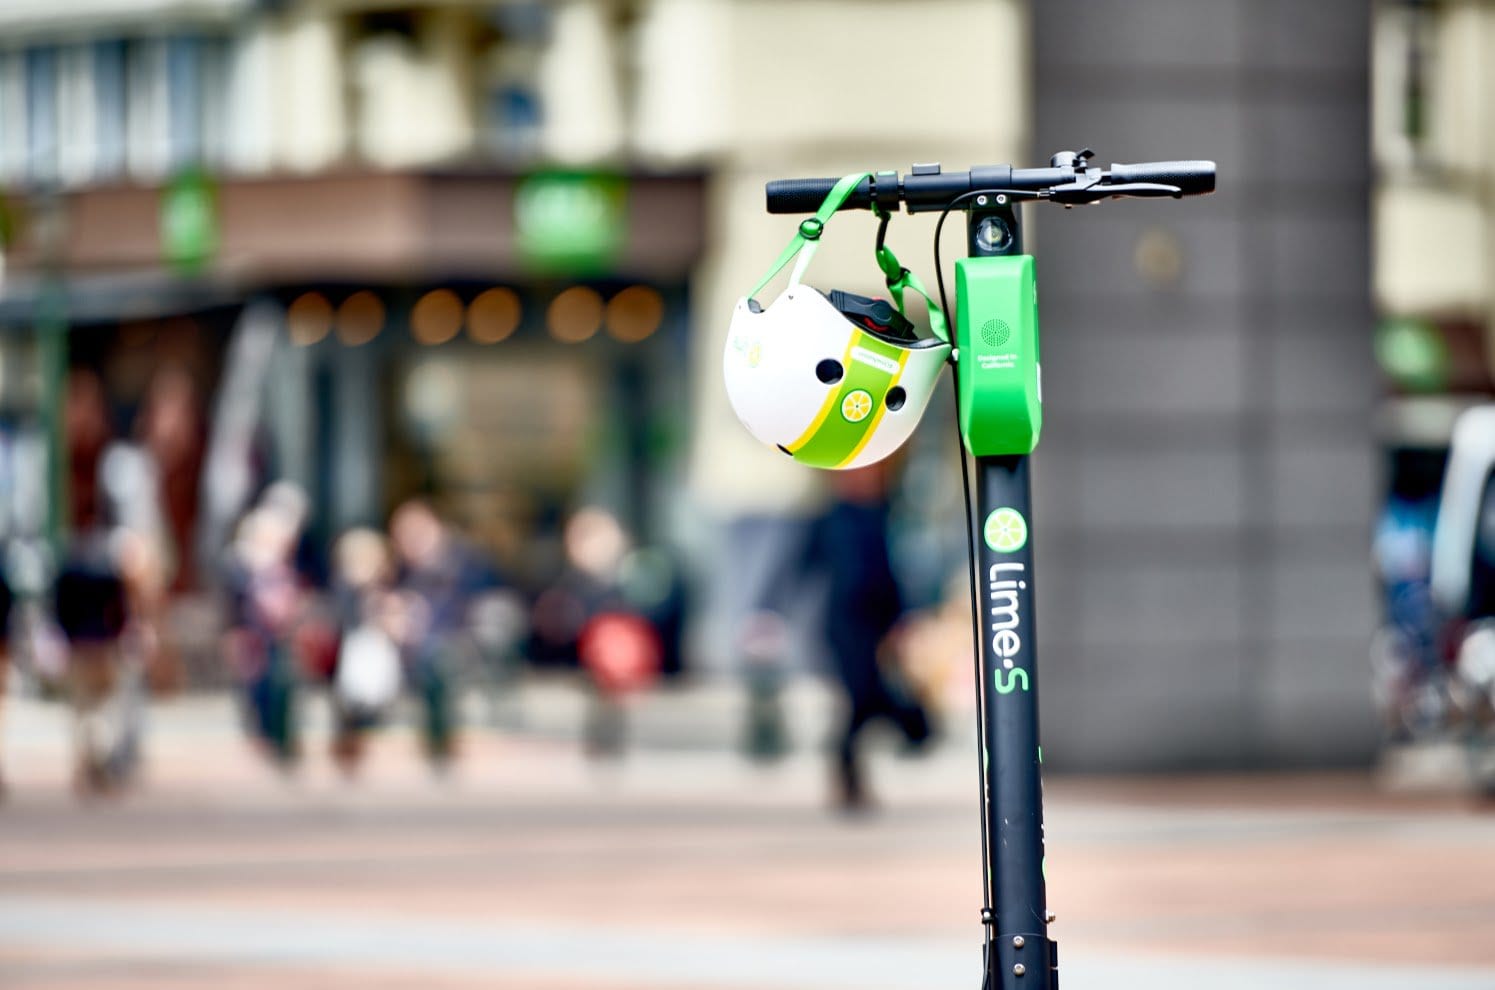 Lime scooter on a city street, with a blurred background of people and businesses.